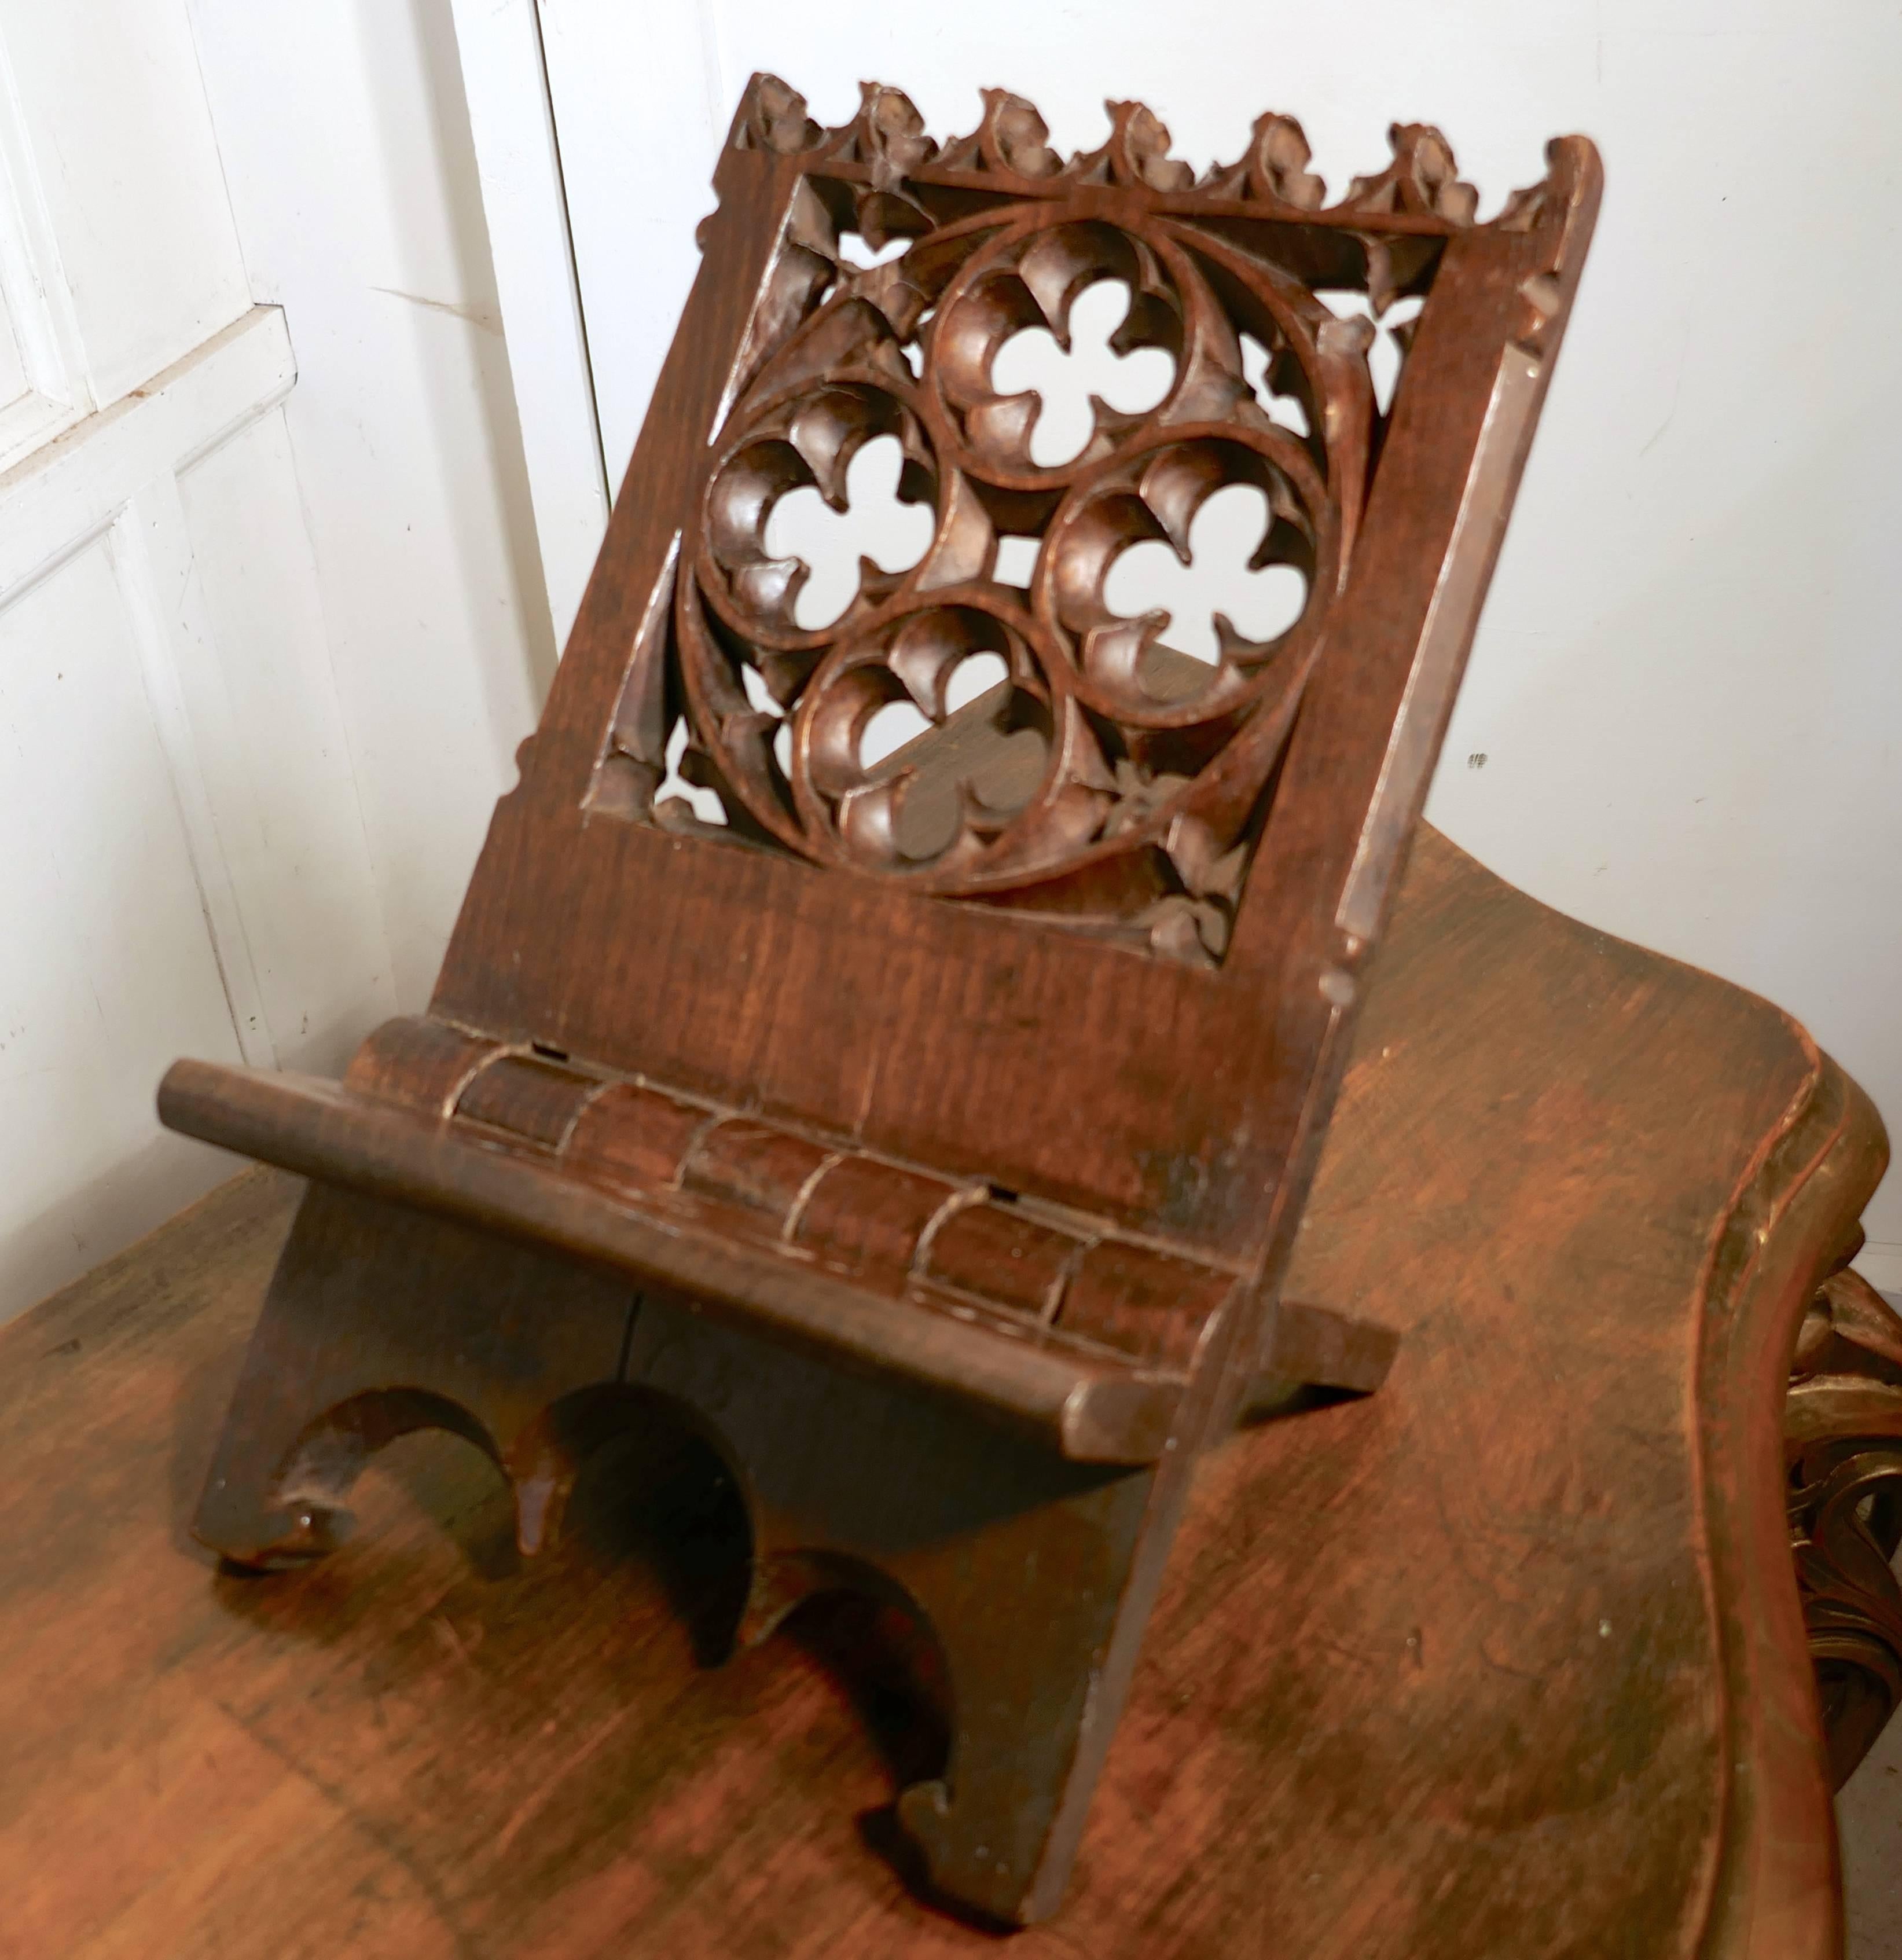 The stand is carved in solid oak with the shapes of Gothic roses, I was told that it originated from a presbytery in France,
This is a charming piece, it is made from one piece of Oak and dates from the mid-19th century, it has been superbly and